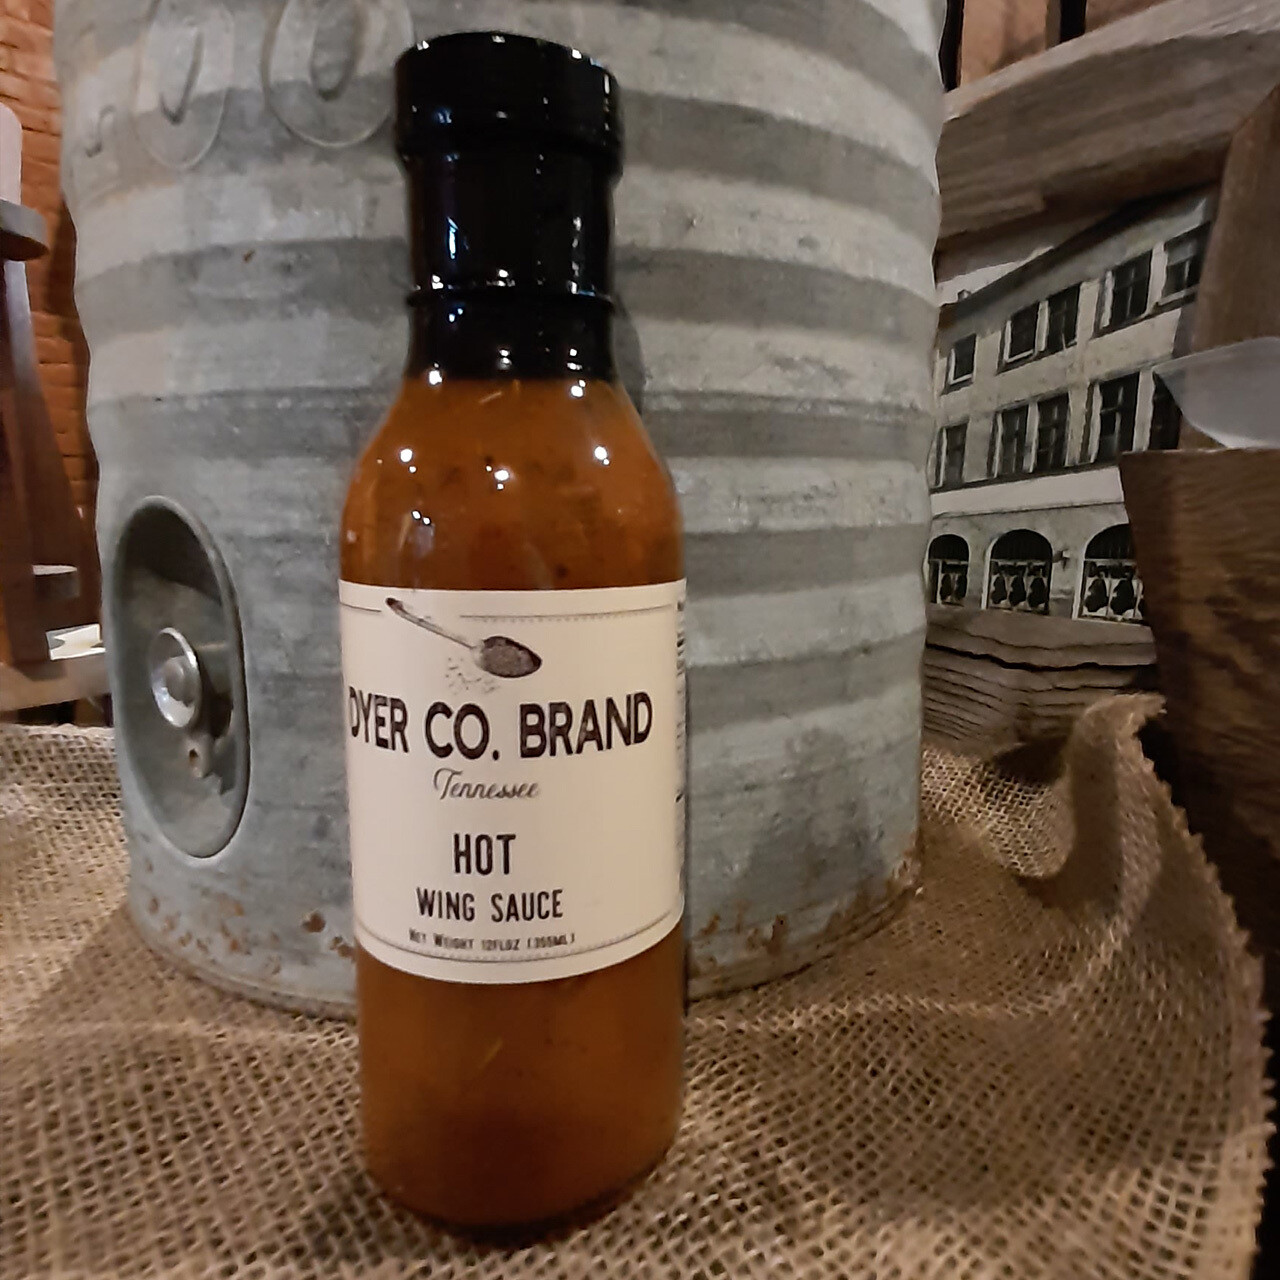 Dyer Co Brand Hot Wing Sauce